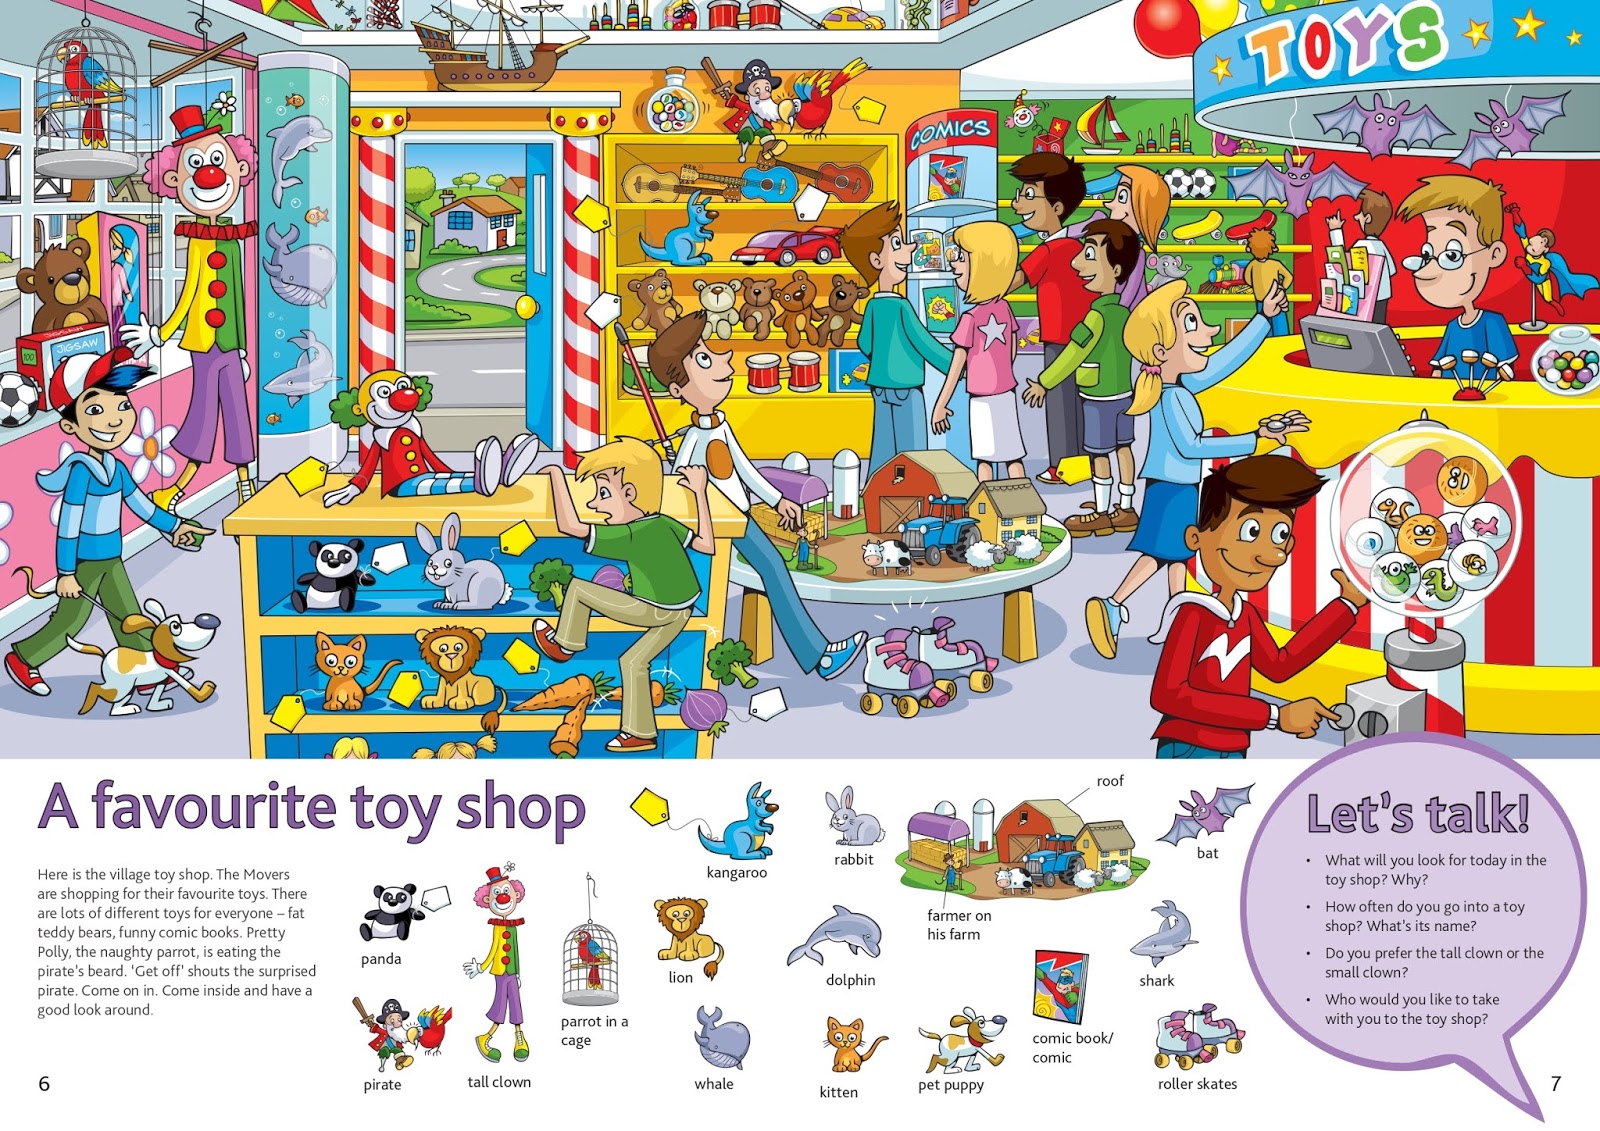 My moving words. Toy shop картинка для детей. Задания in the Toy shop. At the Toy shop. Shopping английский язык.